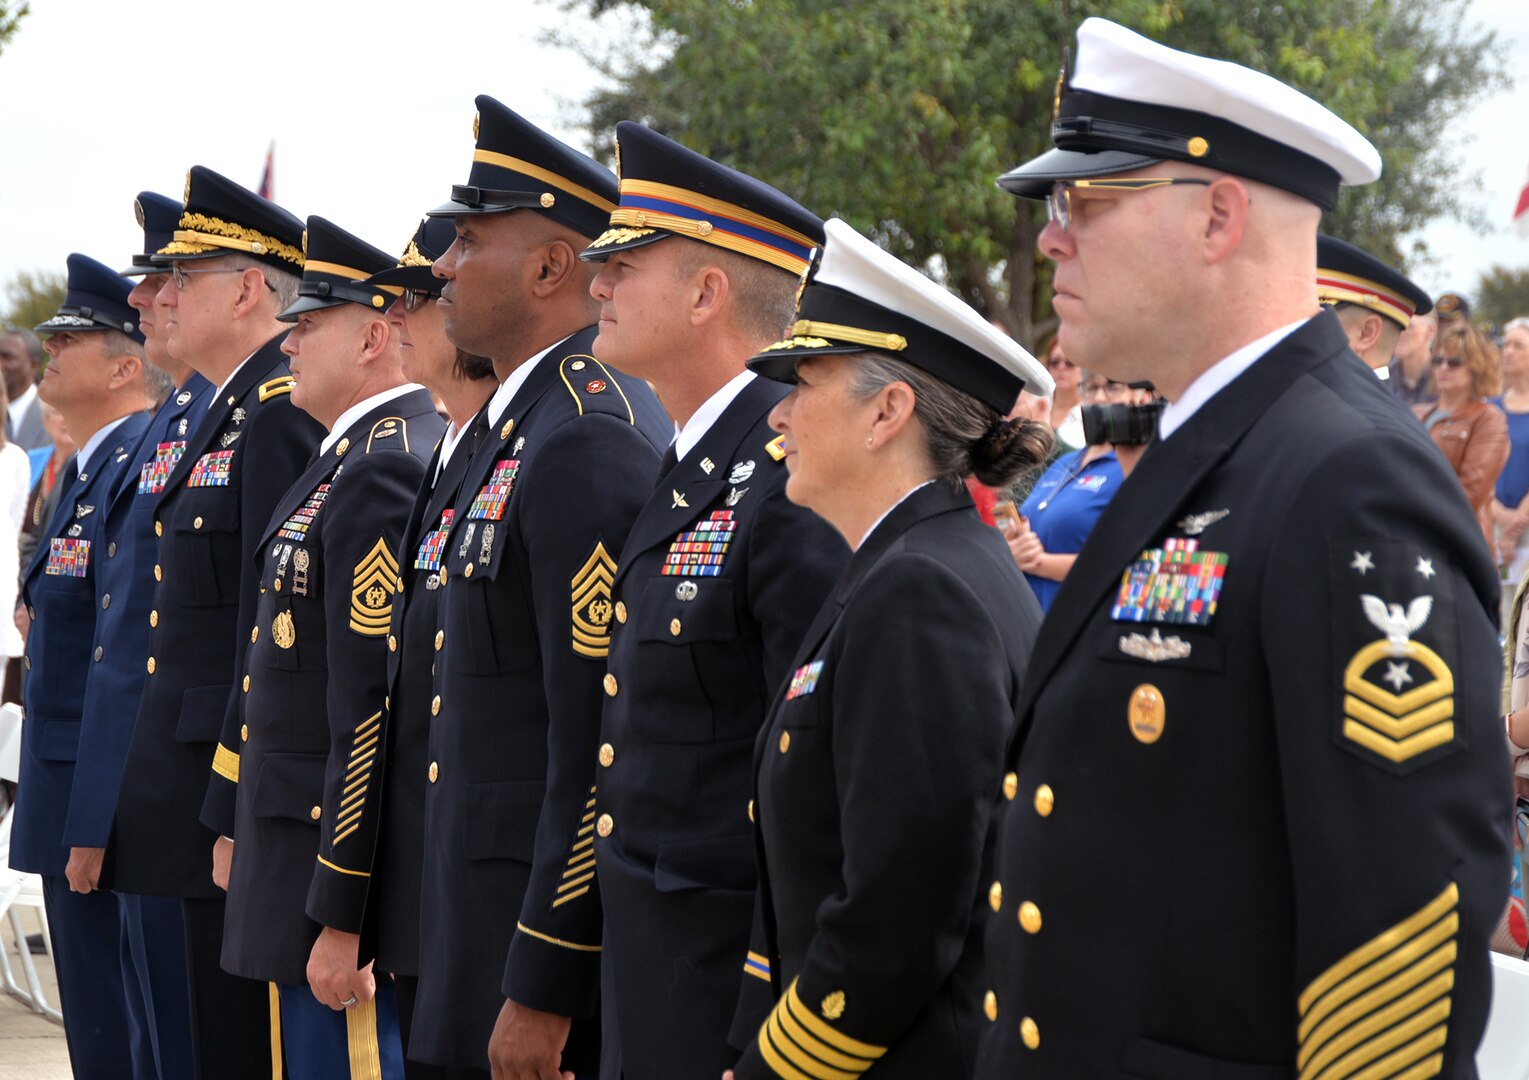 Military leaders from across Joint Base San Antonio were joined by hundreds of veterans, military members, family and patriots who turned out for a celebration of America’s veterans at the Fort Sam Houston National Cemetery Veterans Day Ceremony Nov. 11.